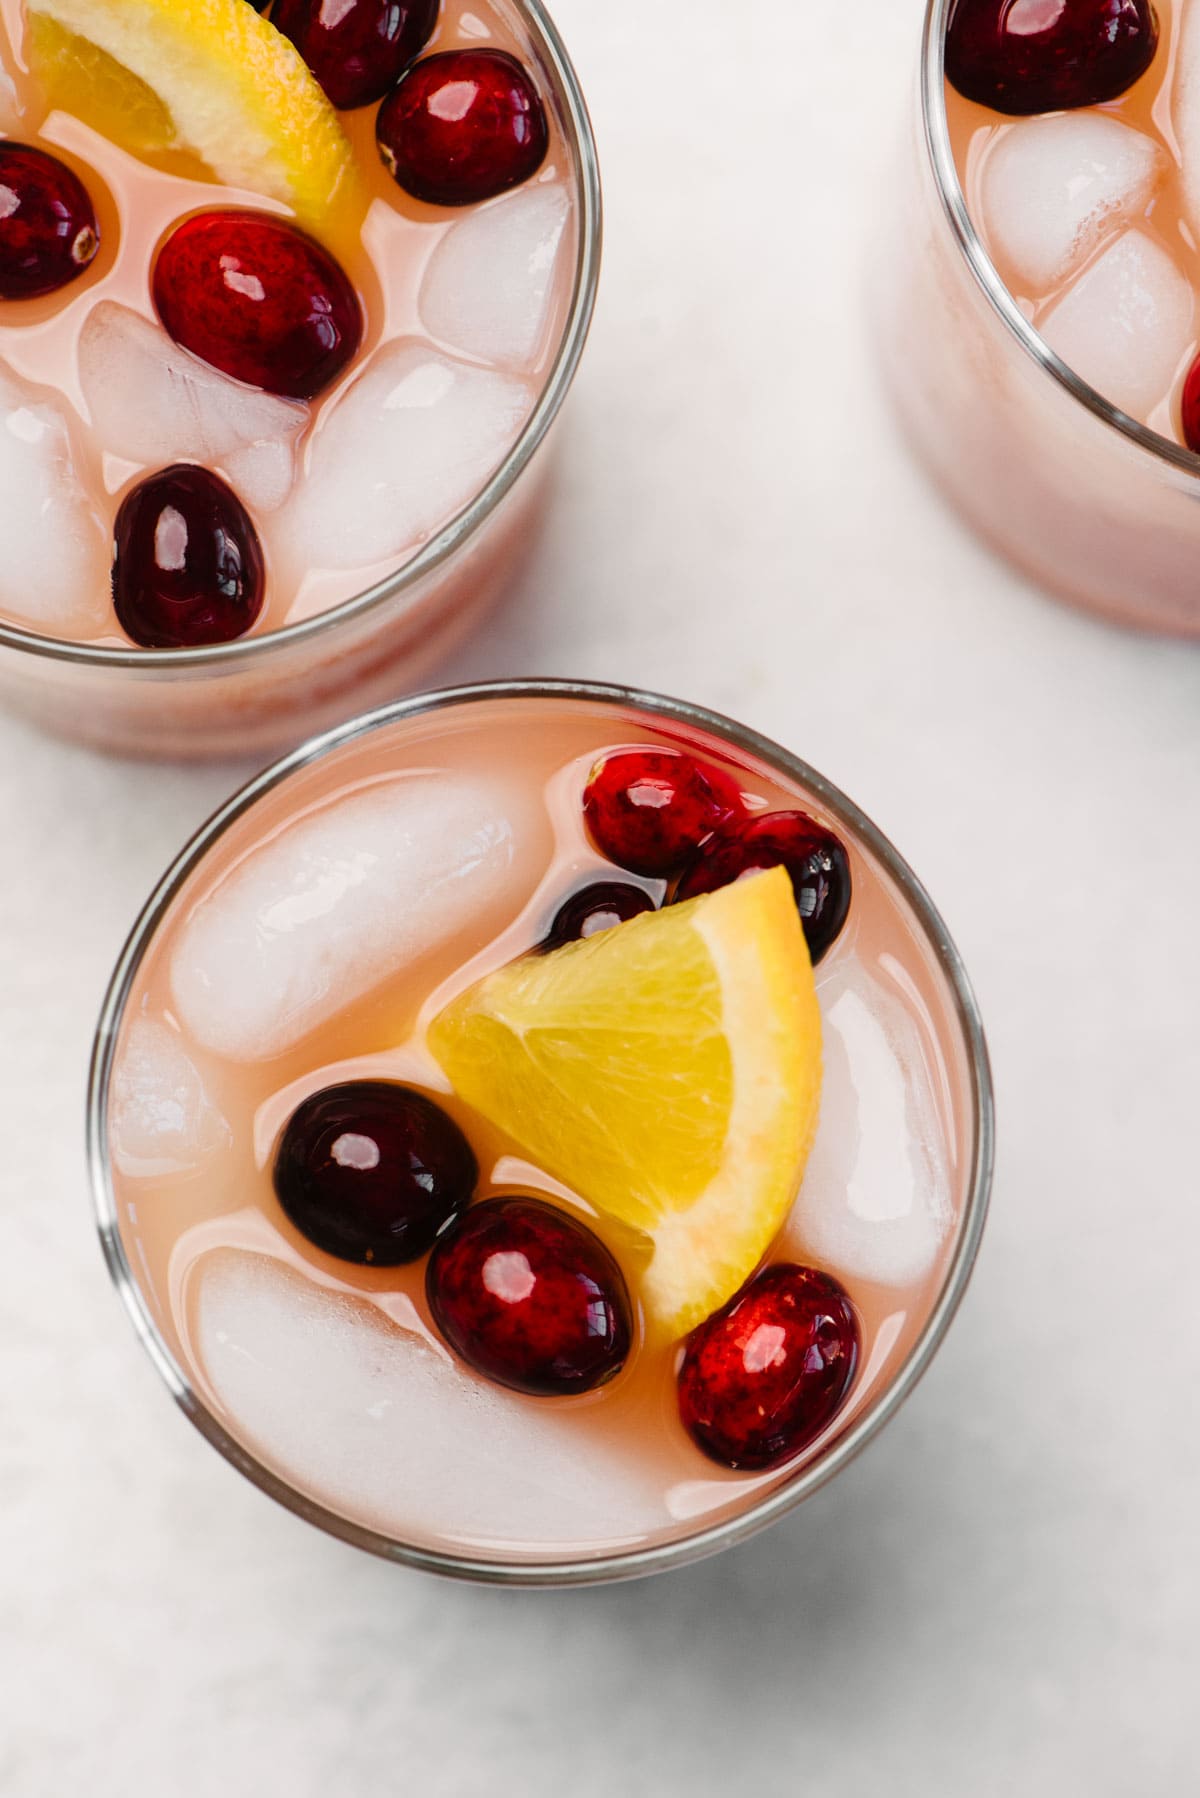 From overhead, several glasses of whiskey punch  on a concrete background, garnished with orange slices and fresh cranberries.